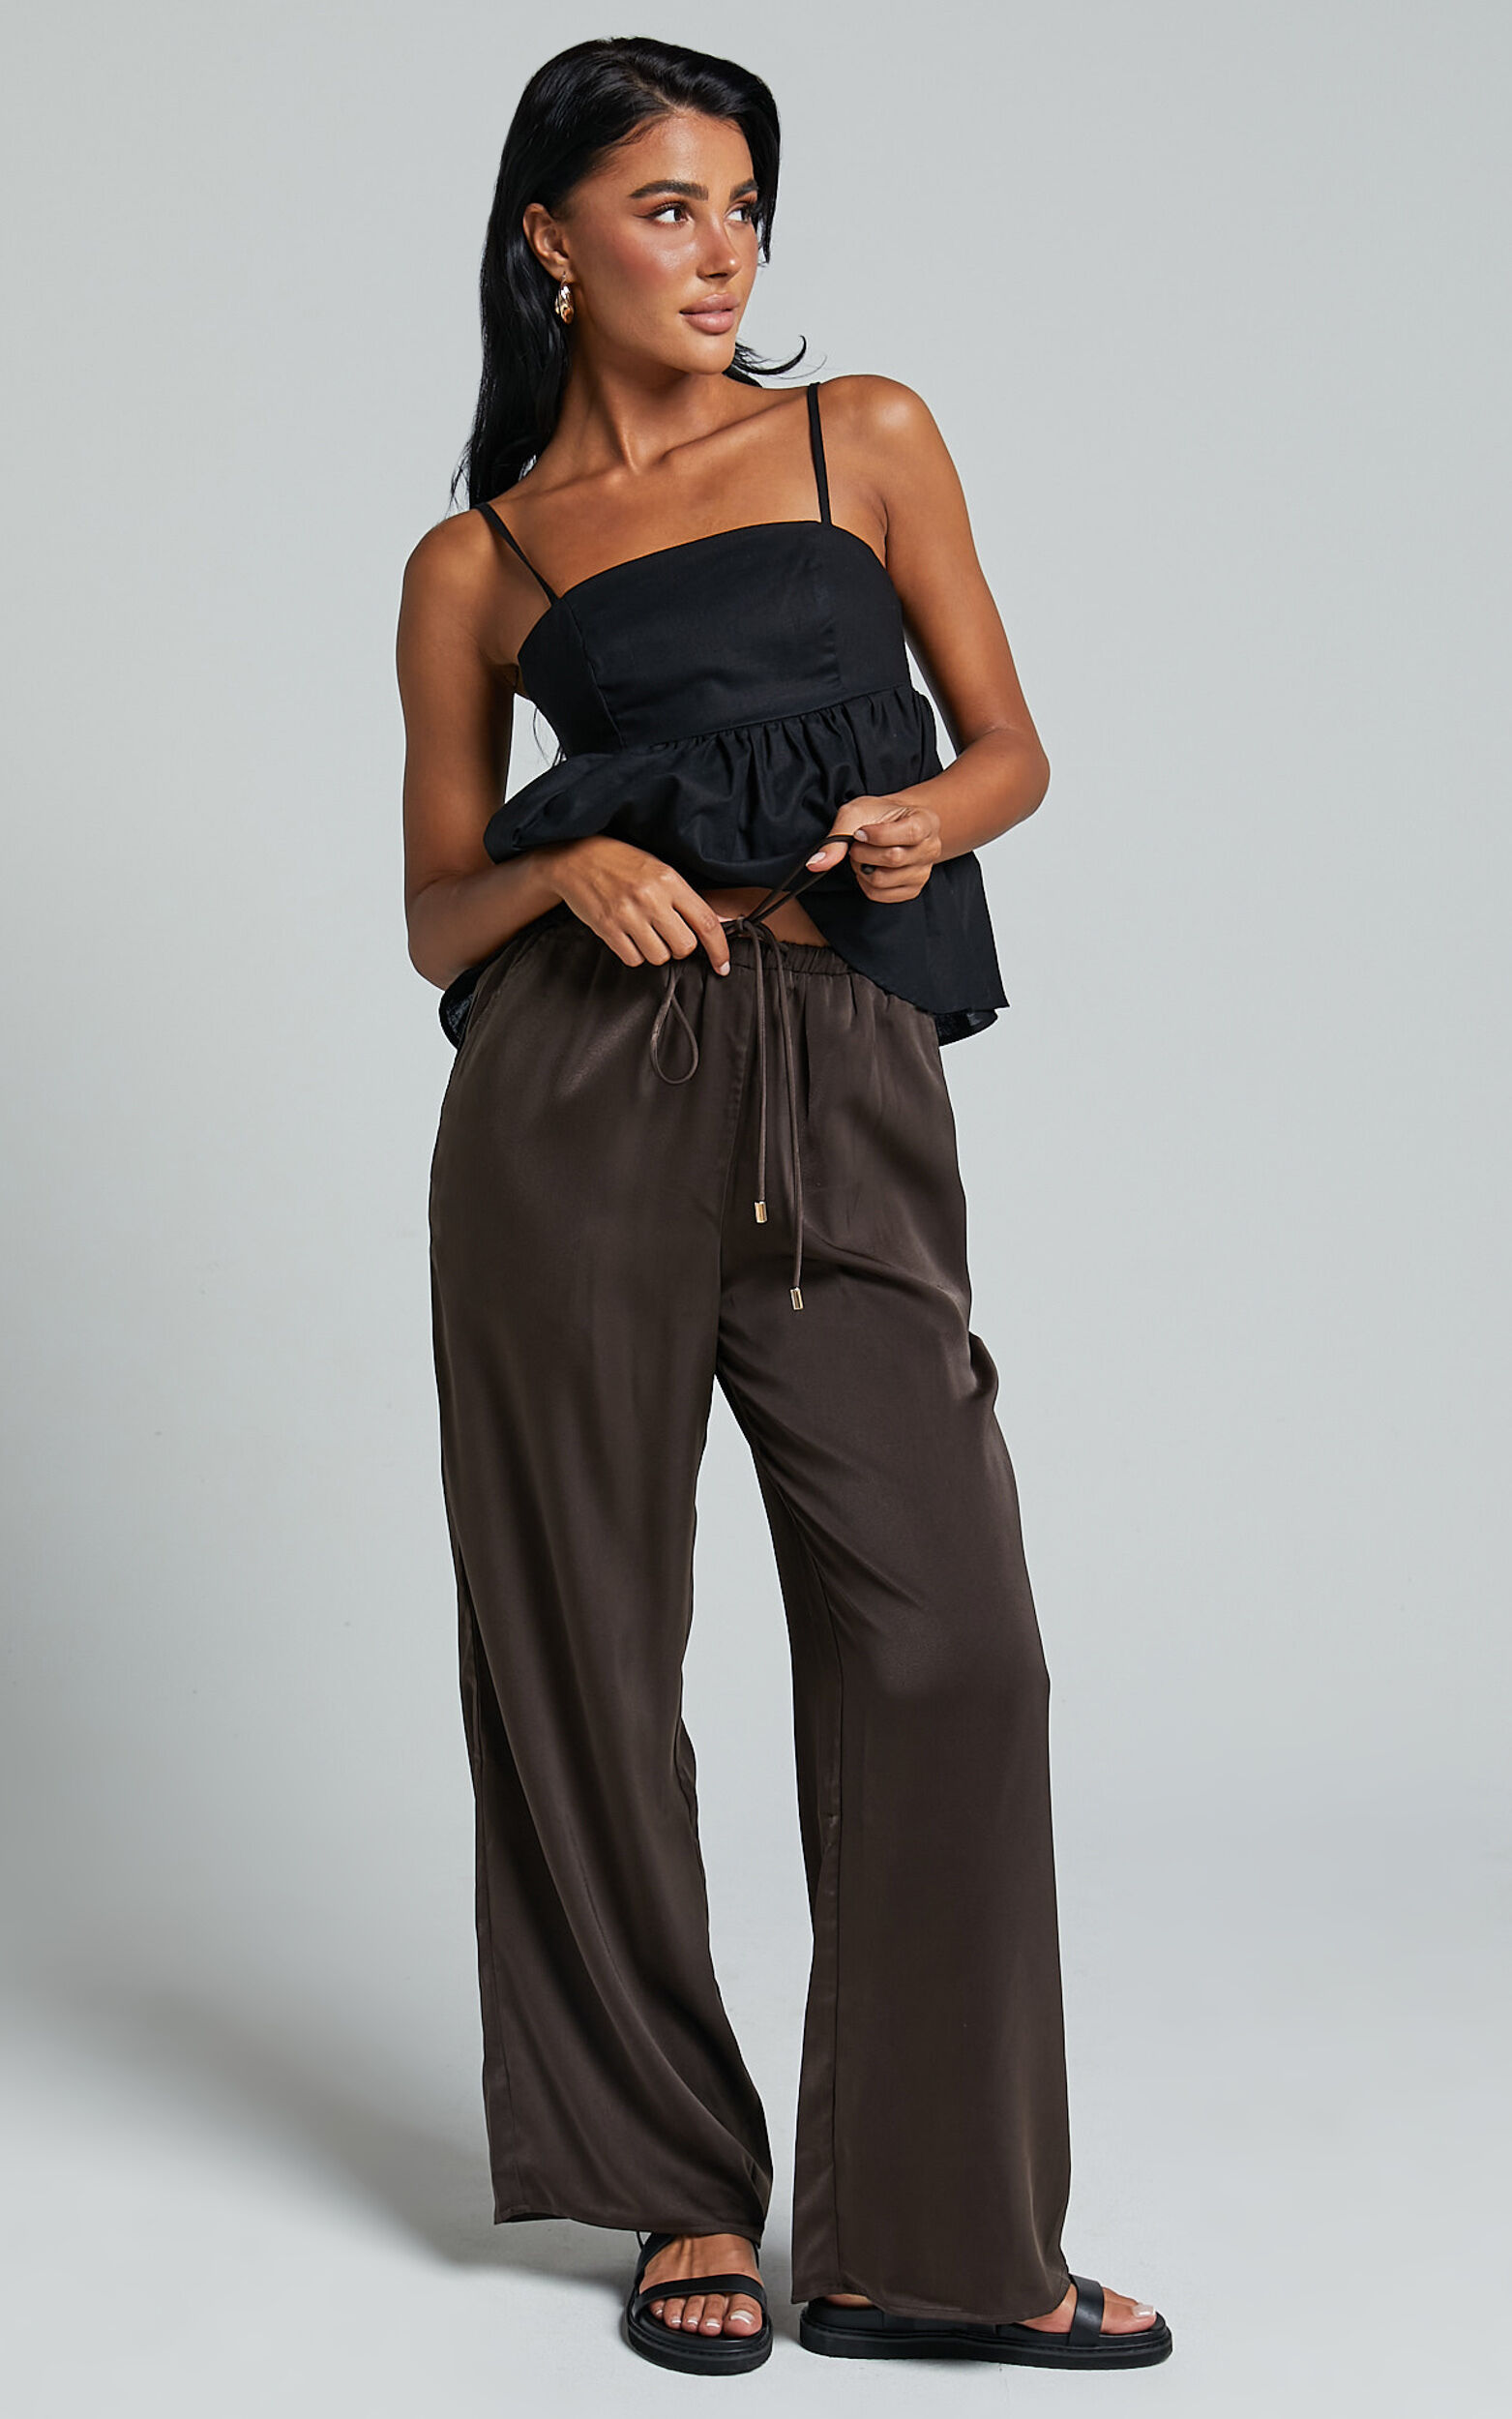 Carlynne Pants - Satin Relaxed Mid Rise Drawstring Pants in Chocolate - 06, BRN1